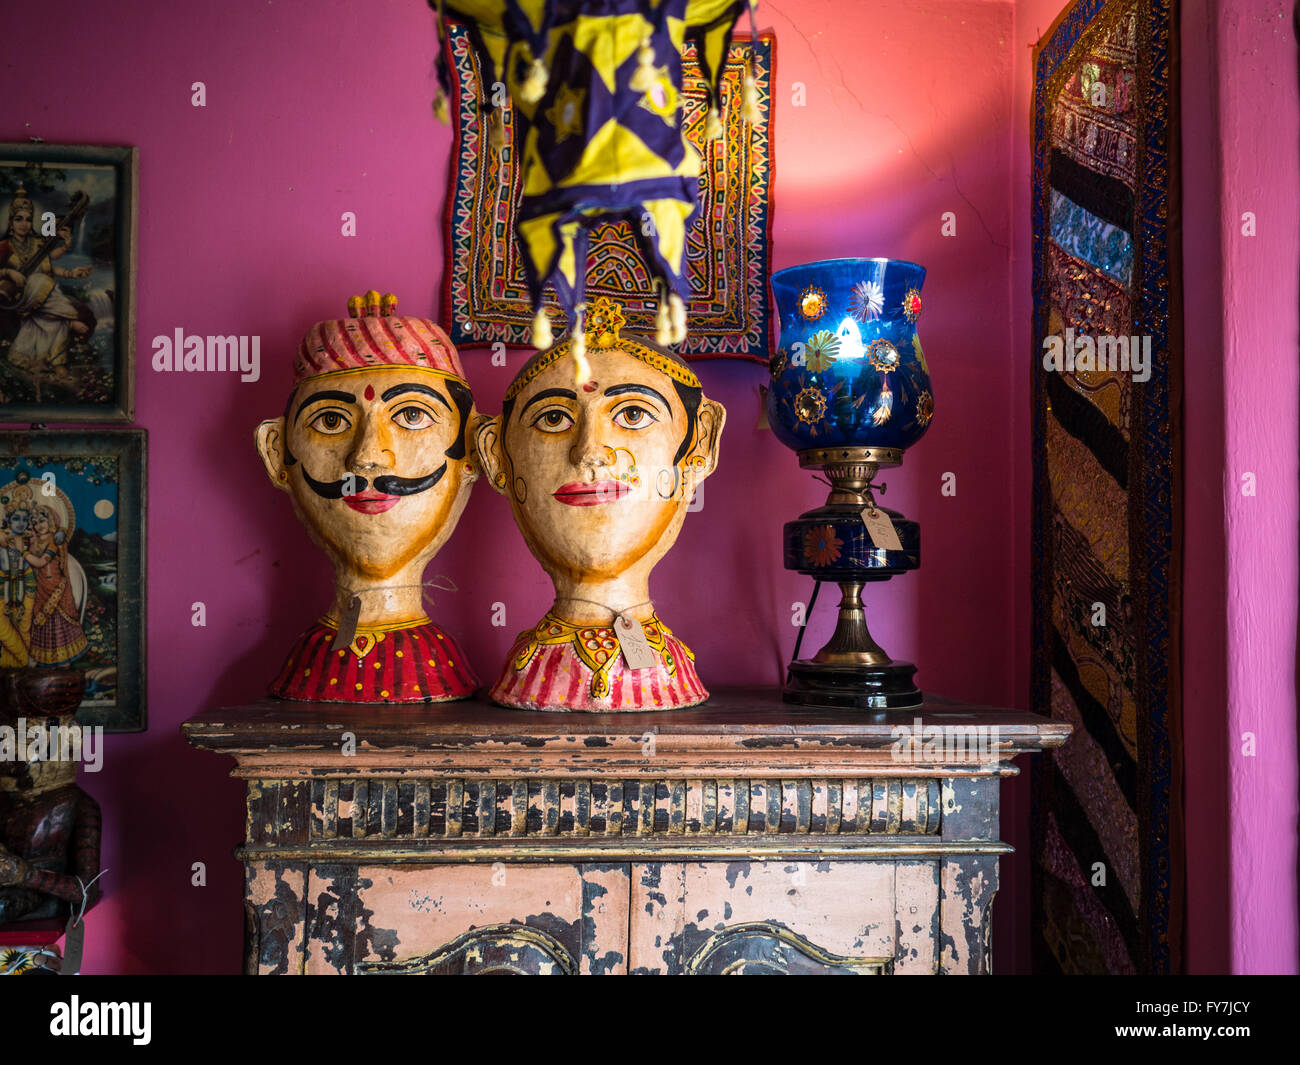 Items for sale in a shop in Glastonbury. With an Indian, Hindu flavour Stock Photo